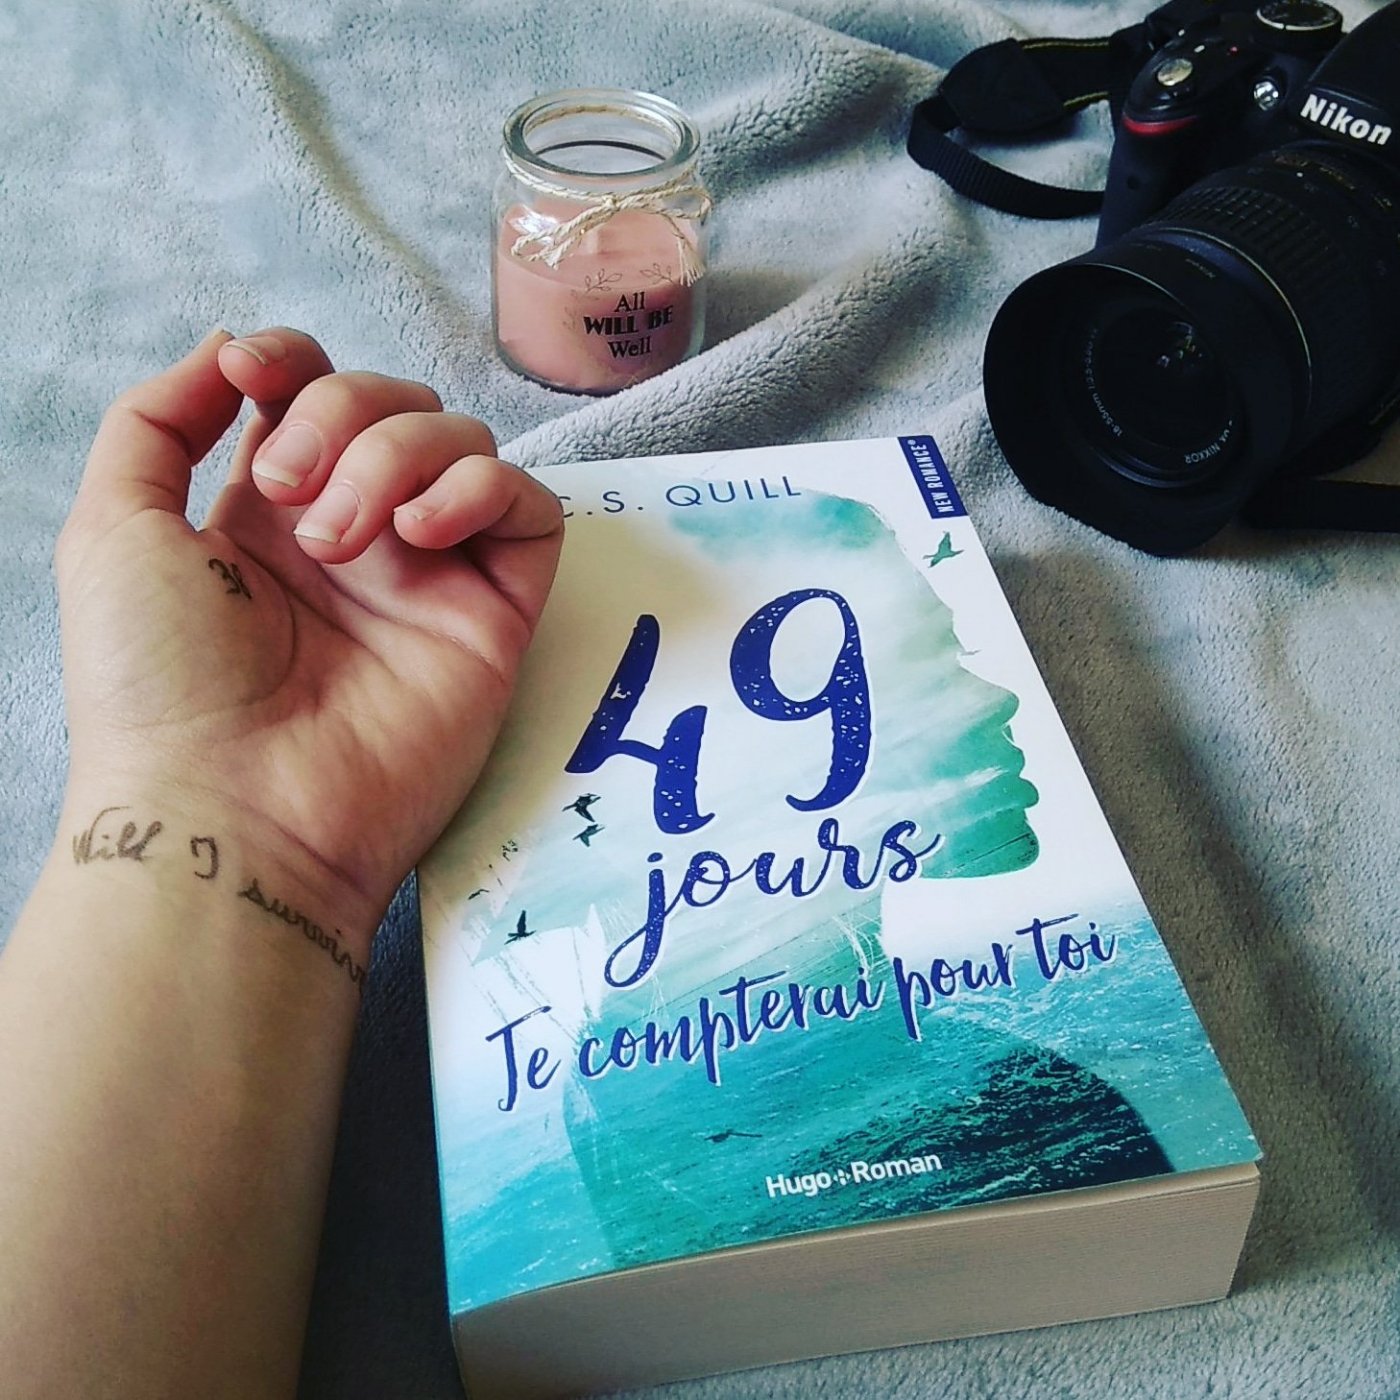 C.S. Quill 49 jours je compterai pour toi by C.S. Quill, Paperback